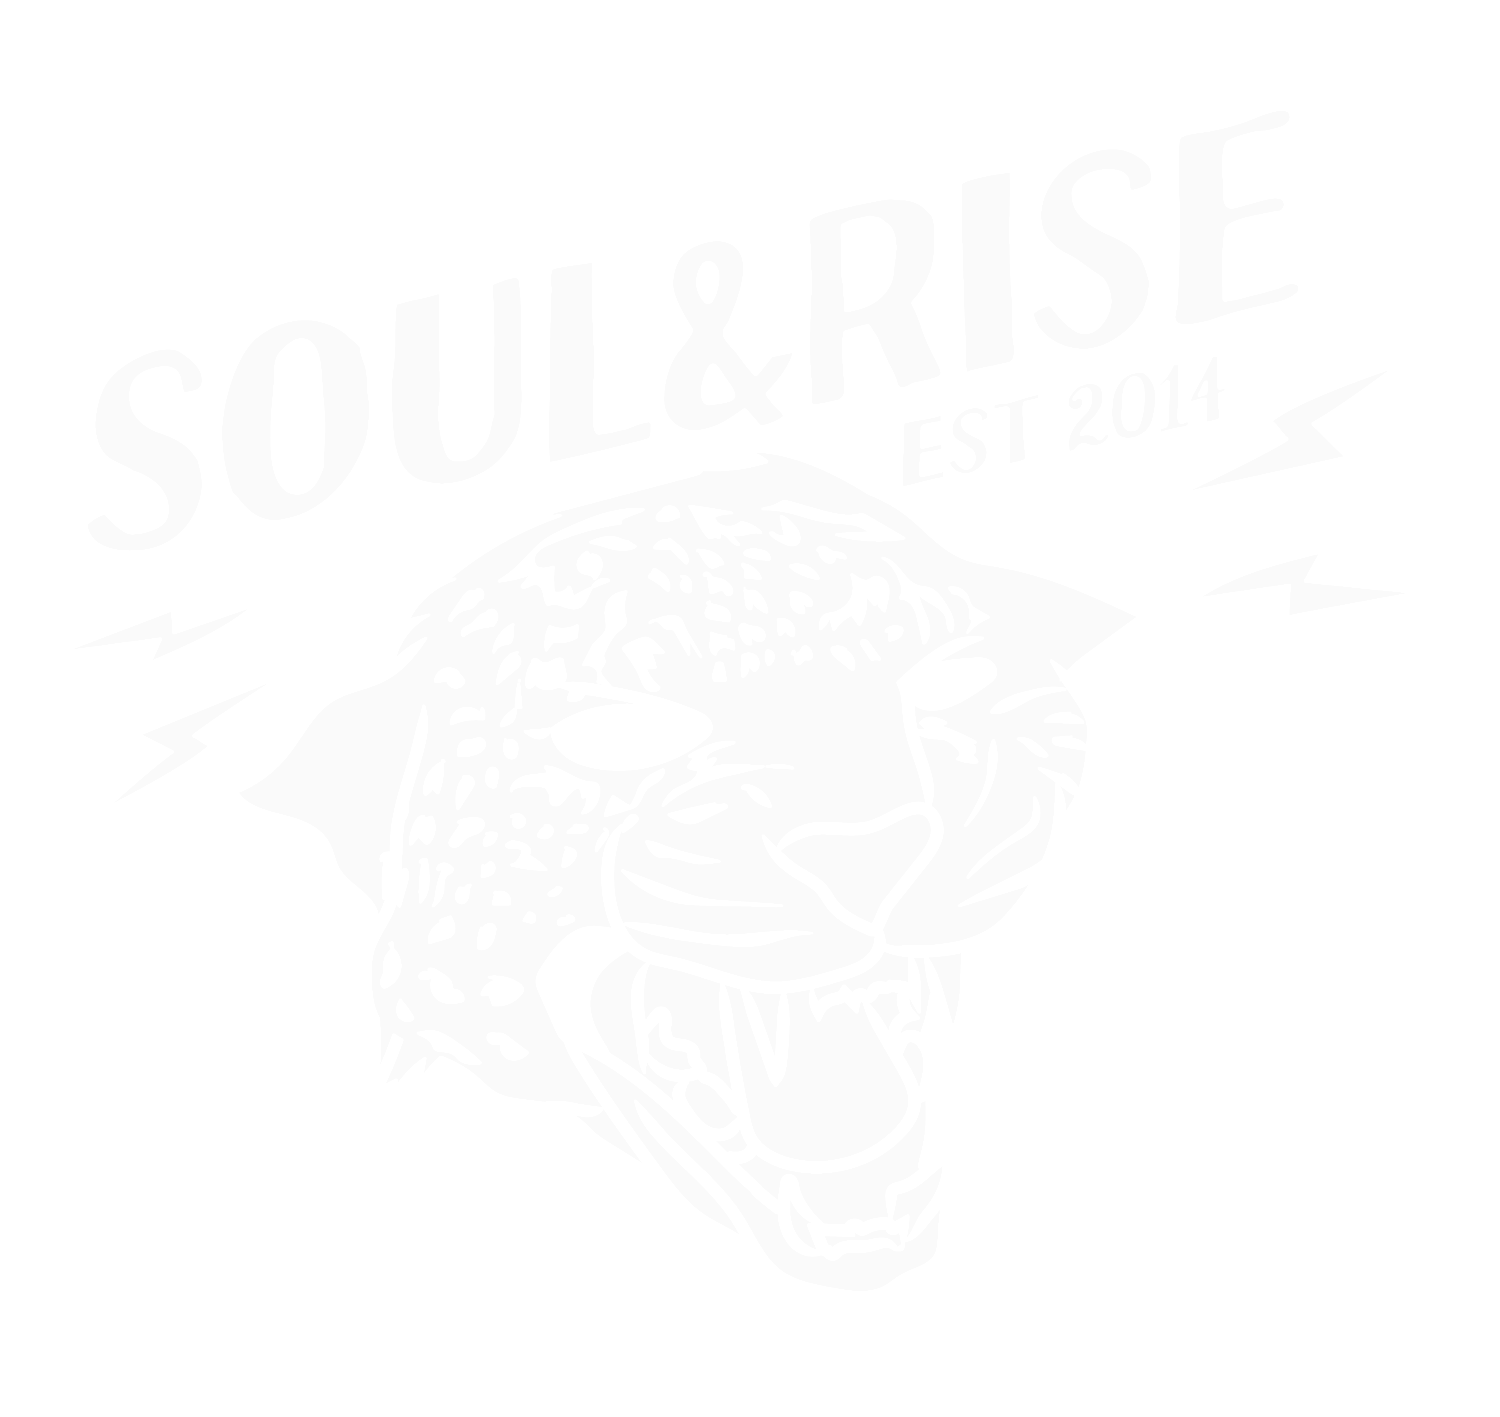 Soul & Rise... a wedding video & photography duo